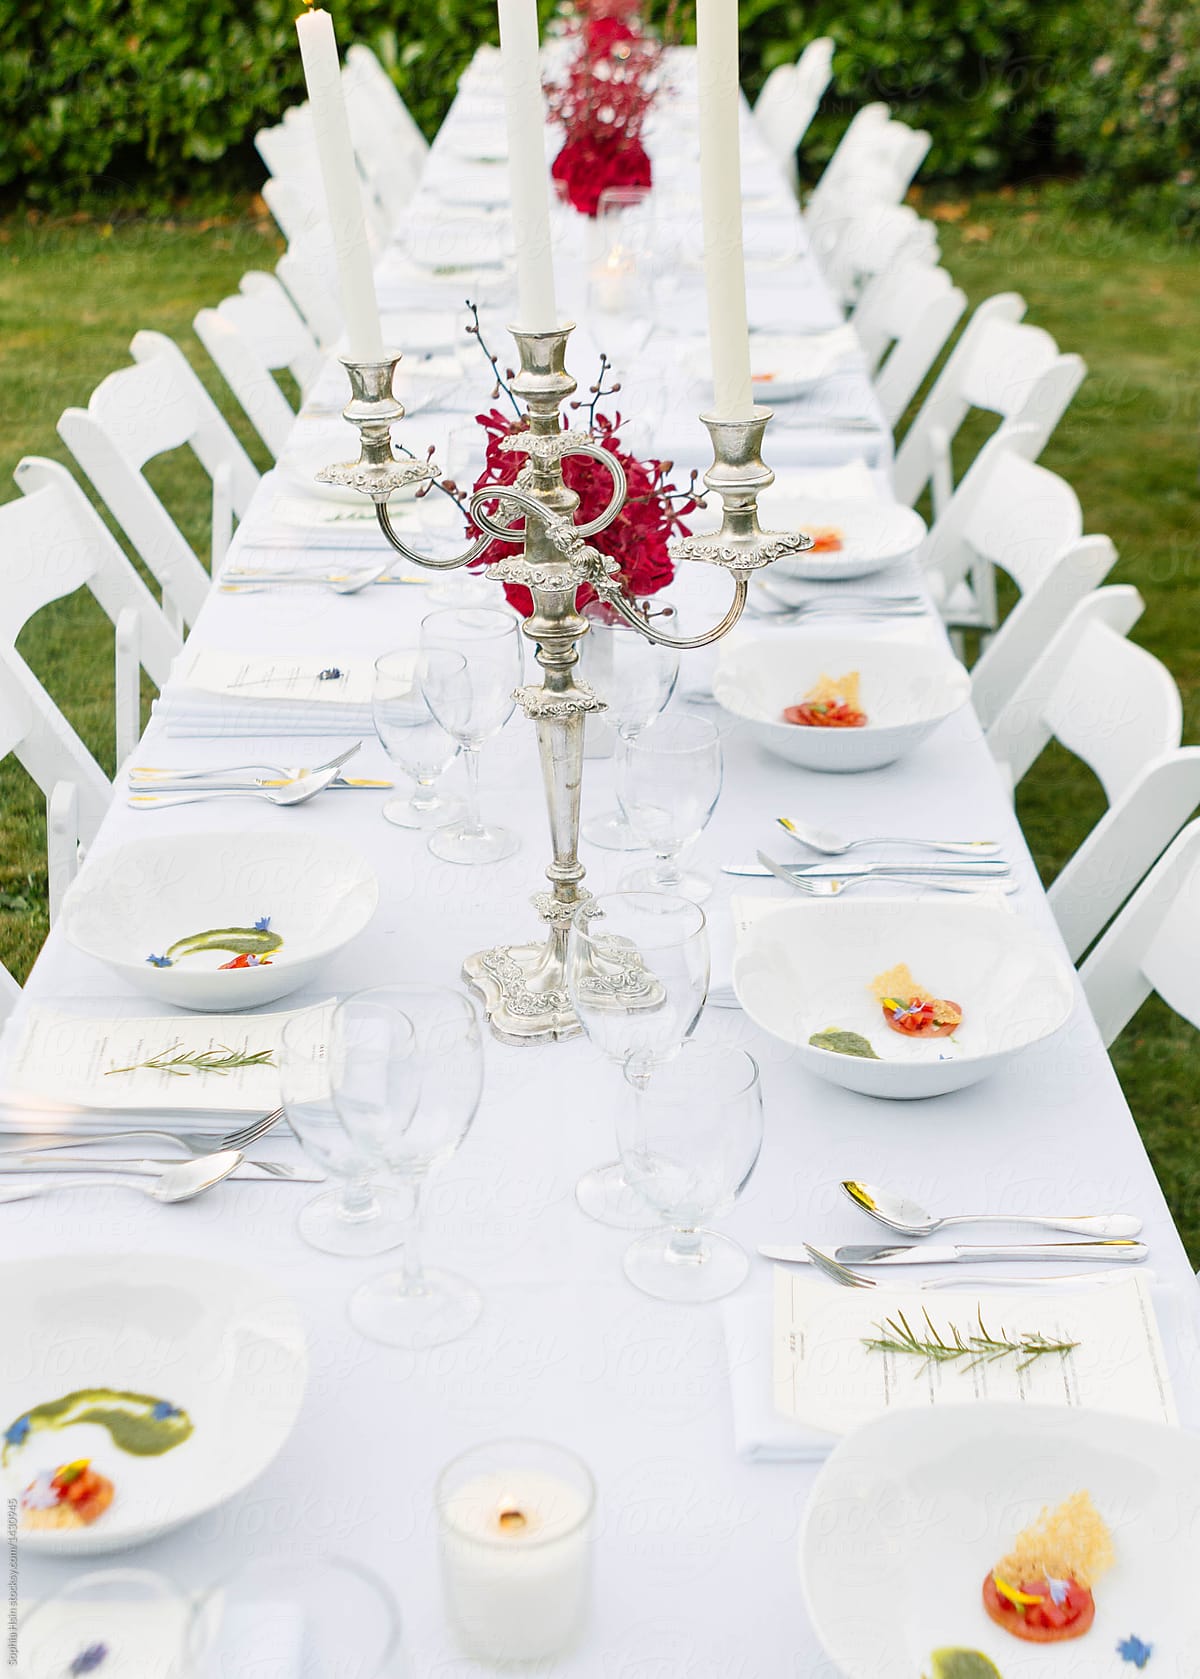 Fancy set up of white themed outdoor dinner party